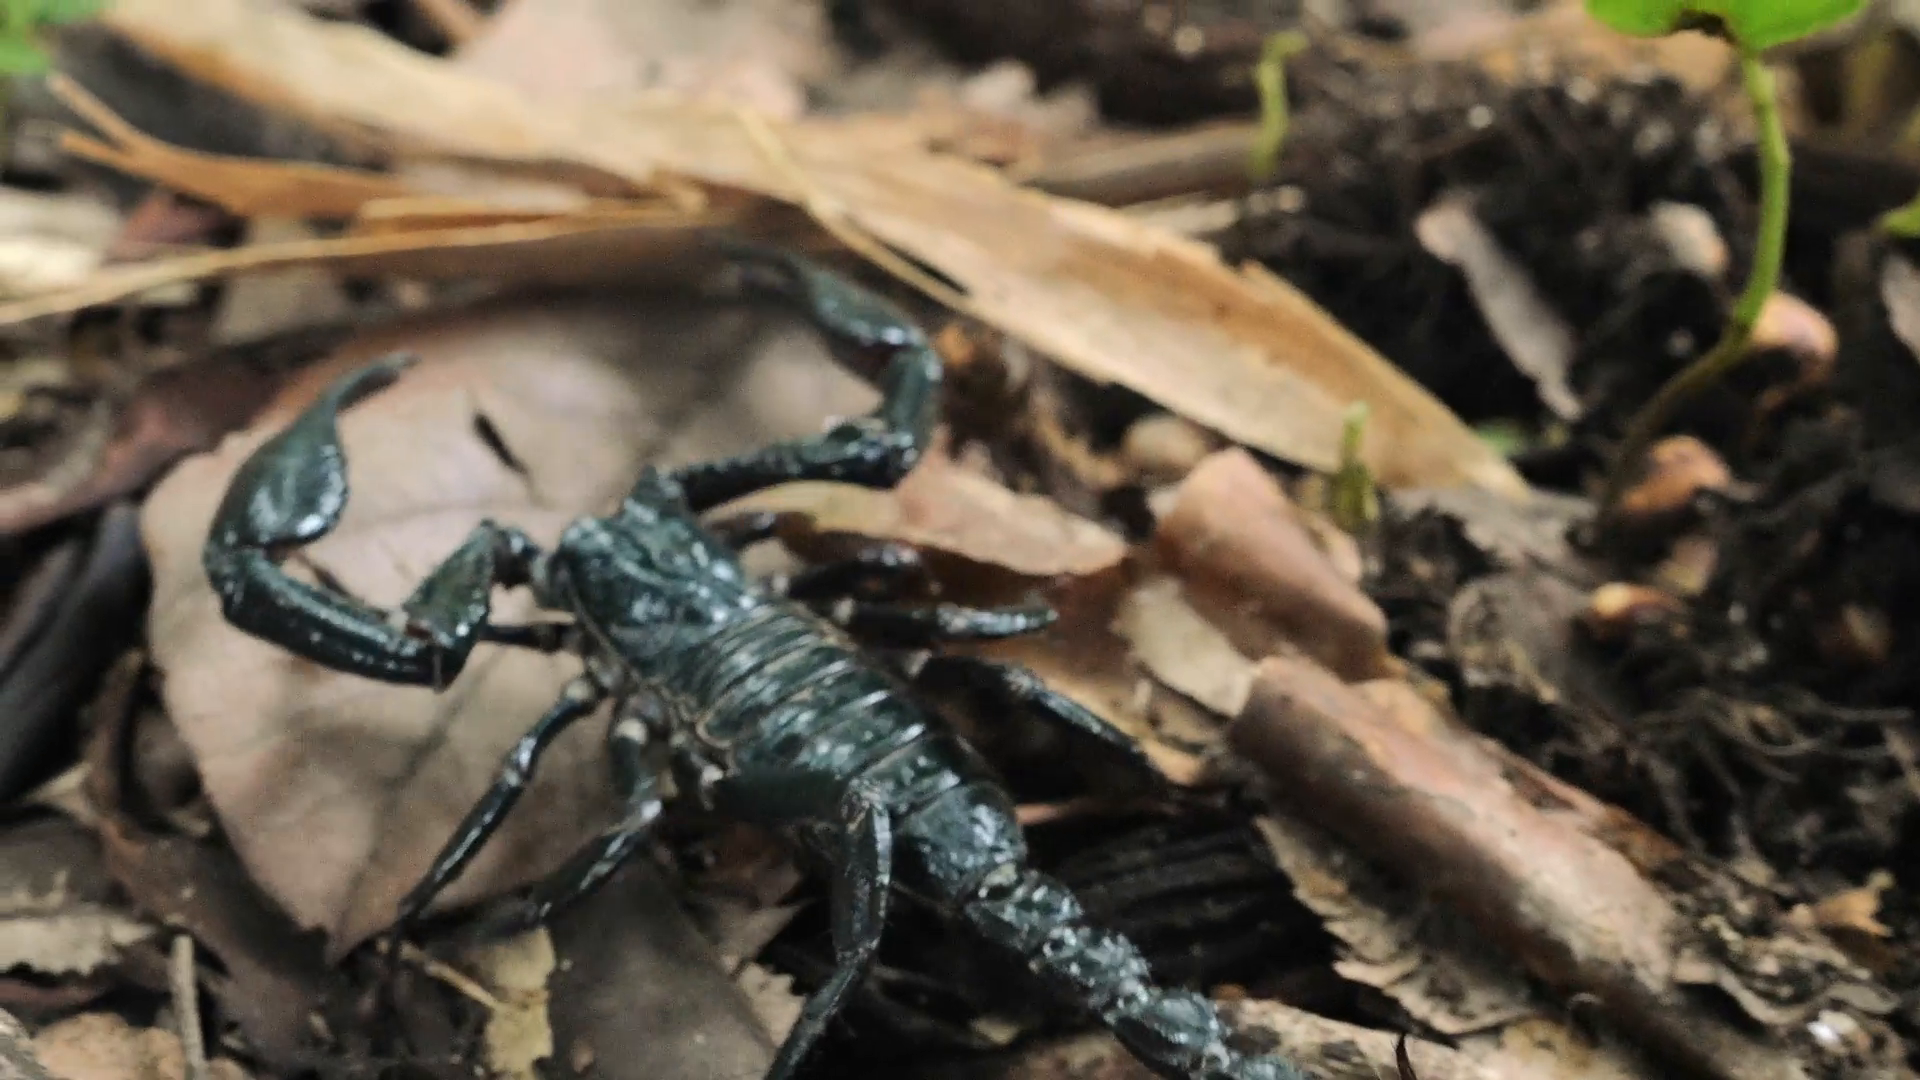 Detailed macro view of scorpion's legs, tail with stinger and claws ...